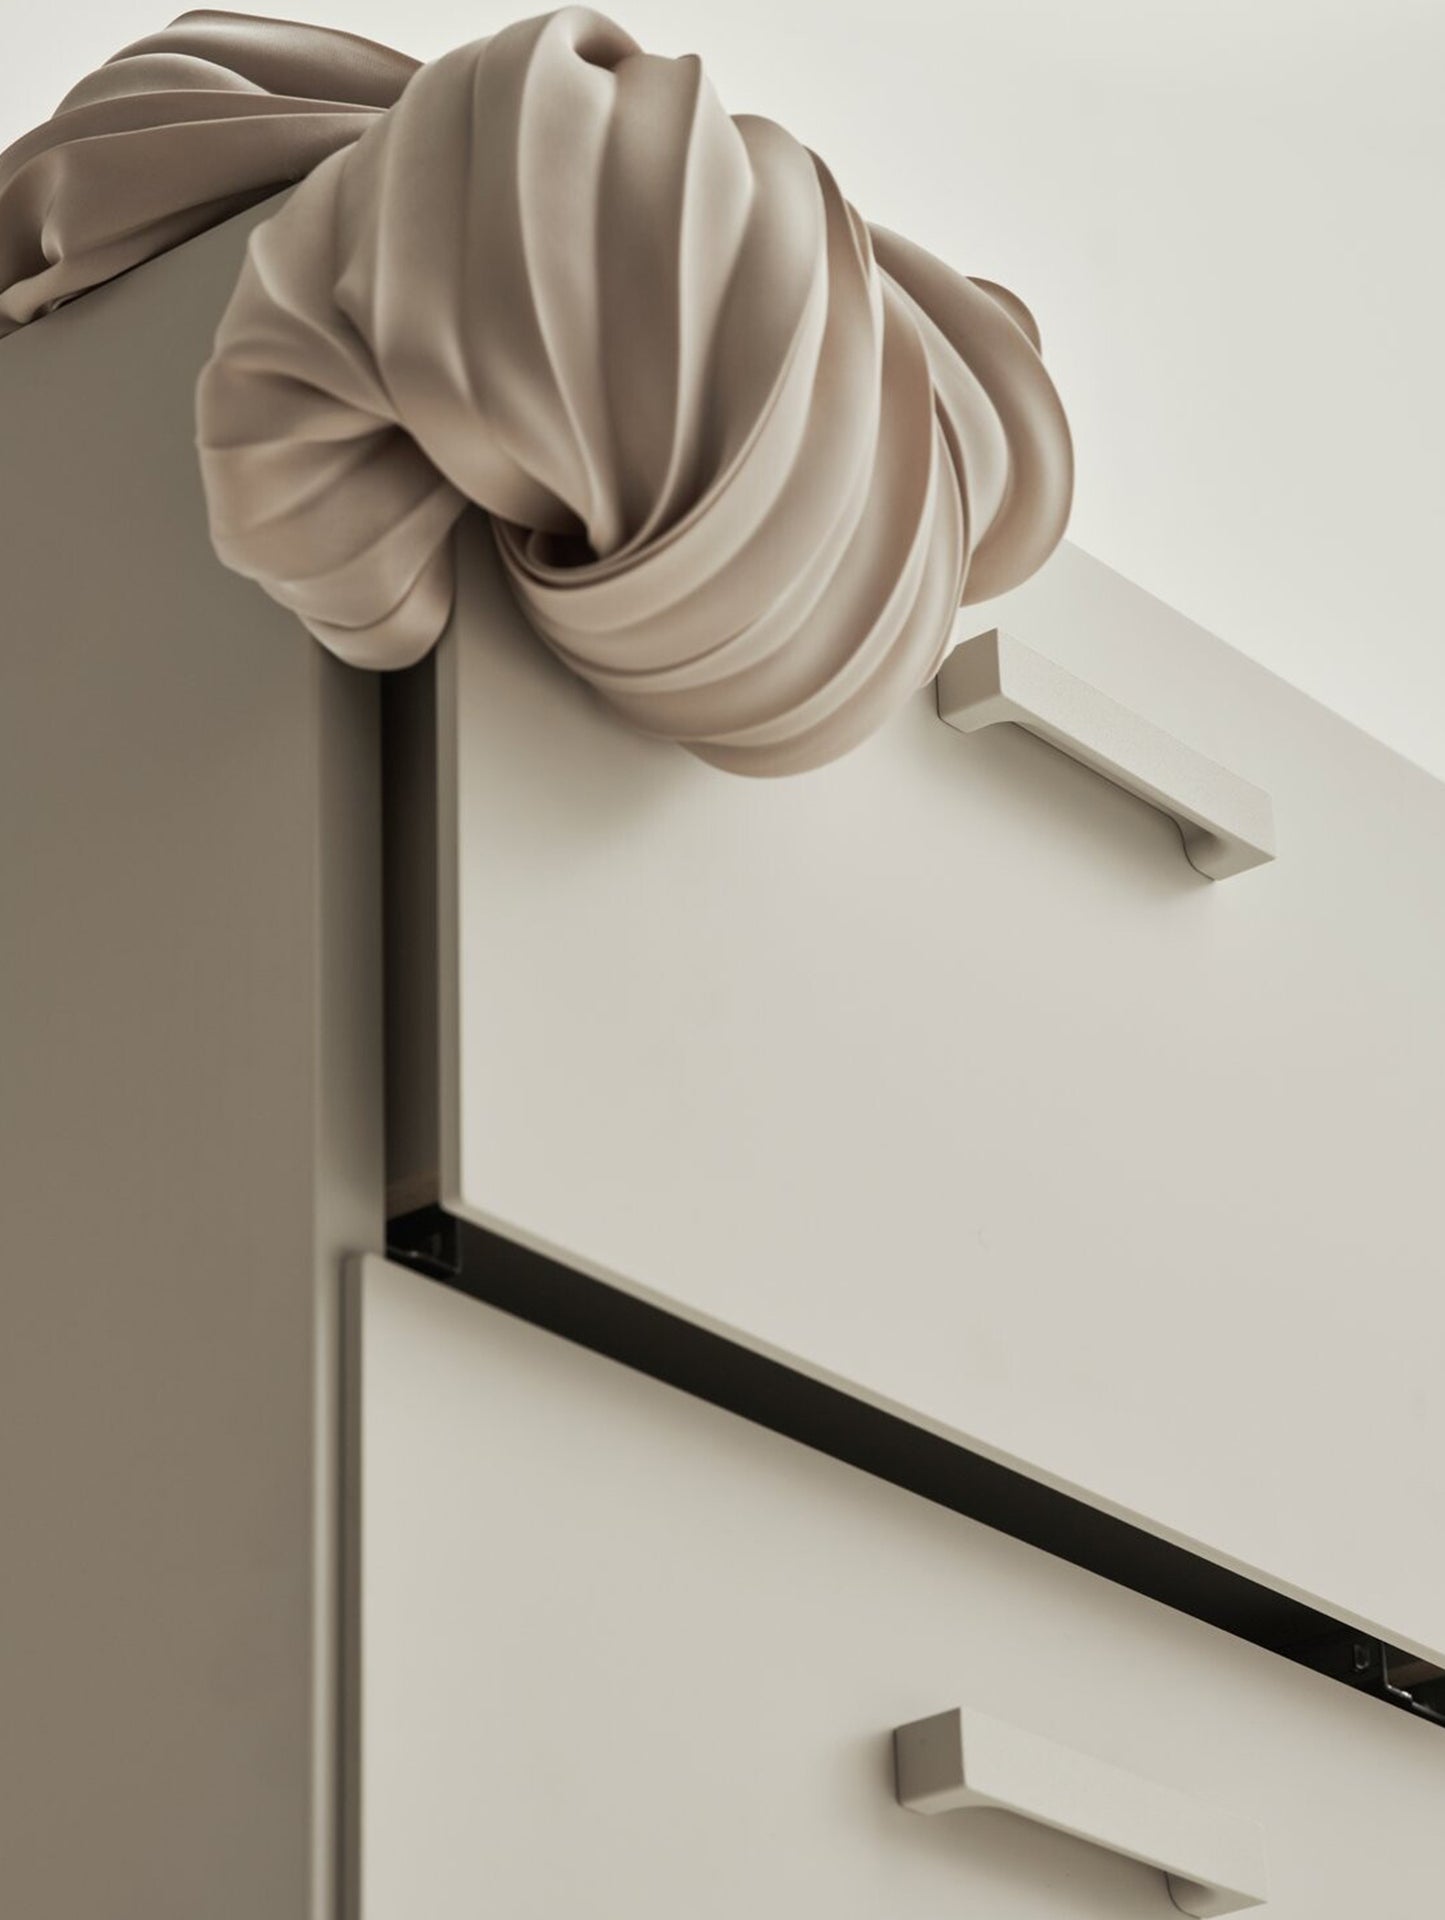 Relief Drawers - Tall by String - Beige